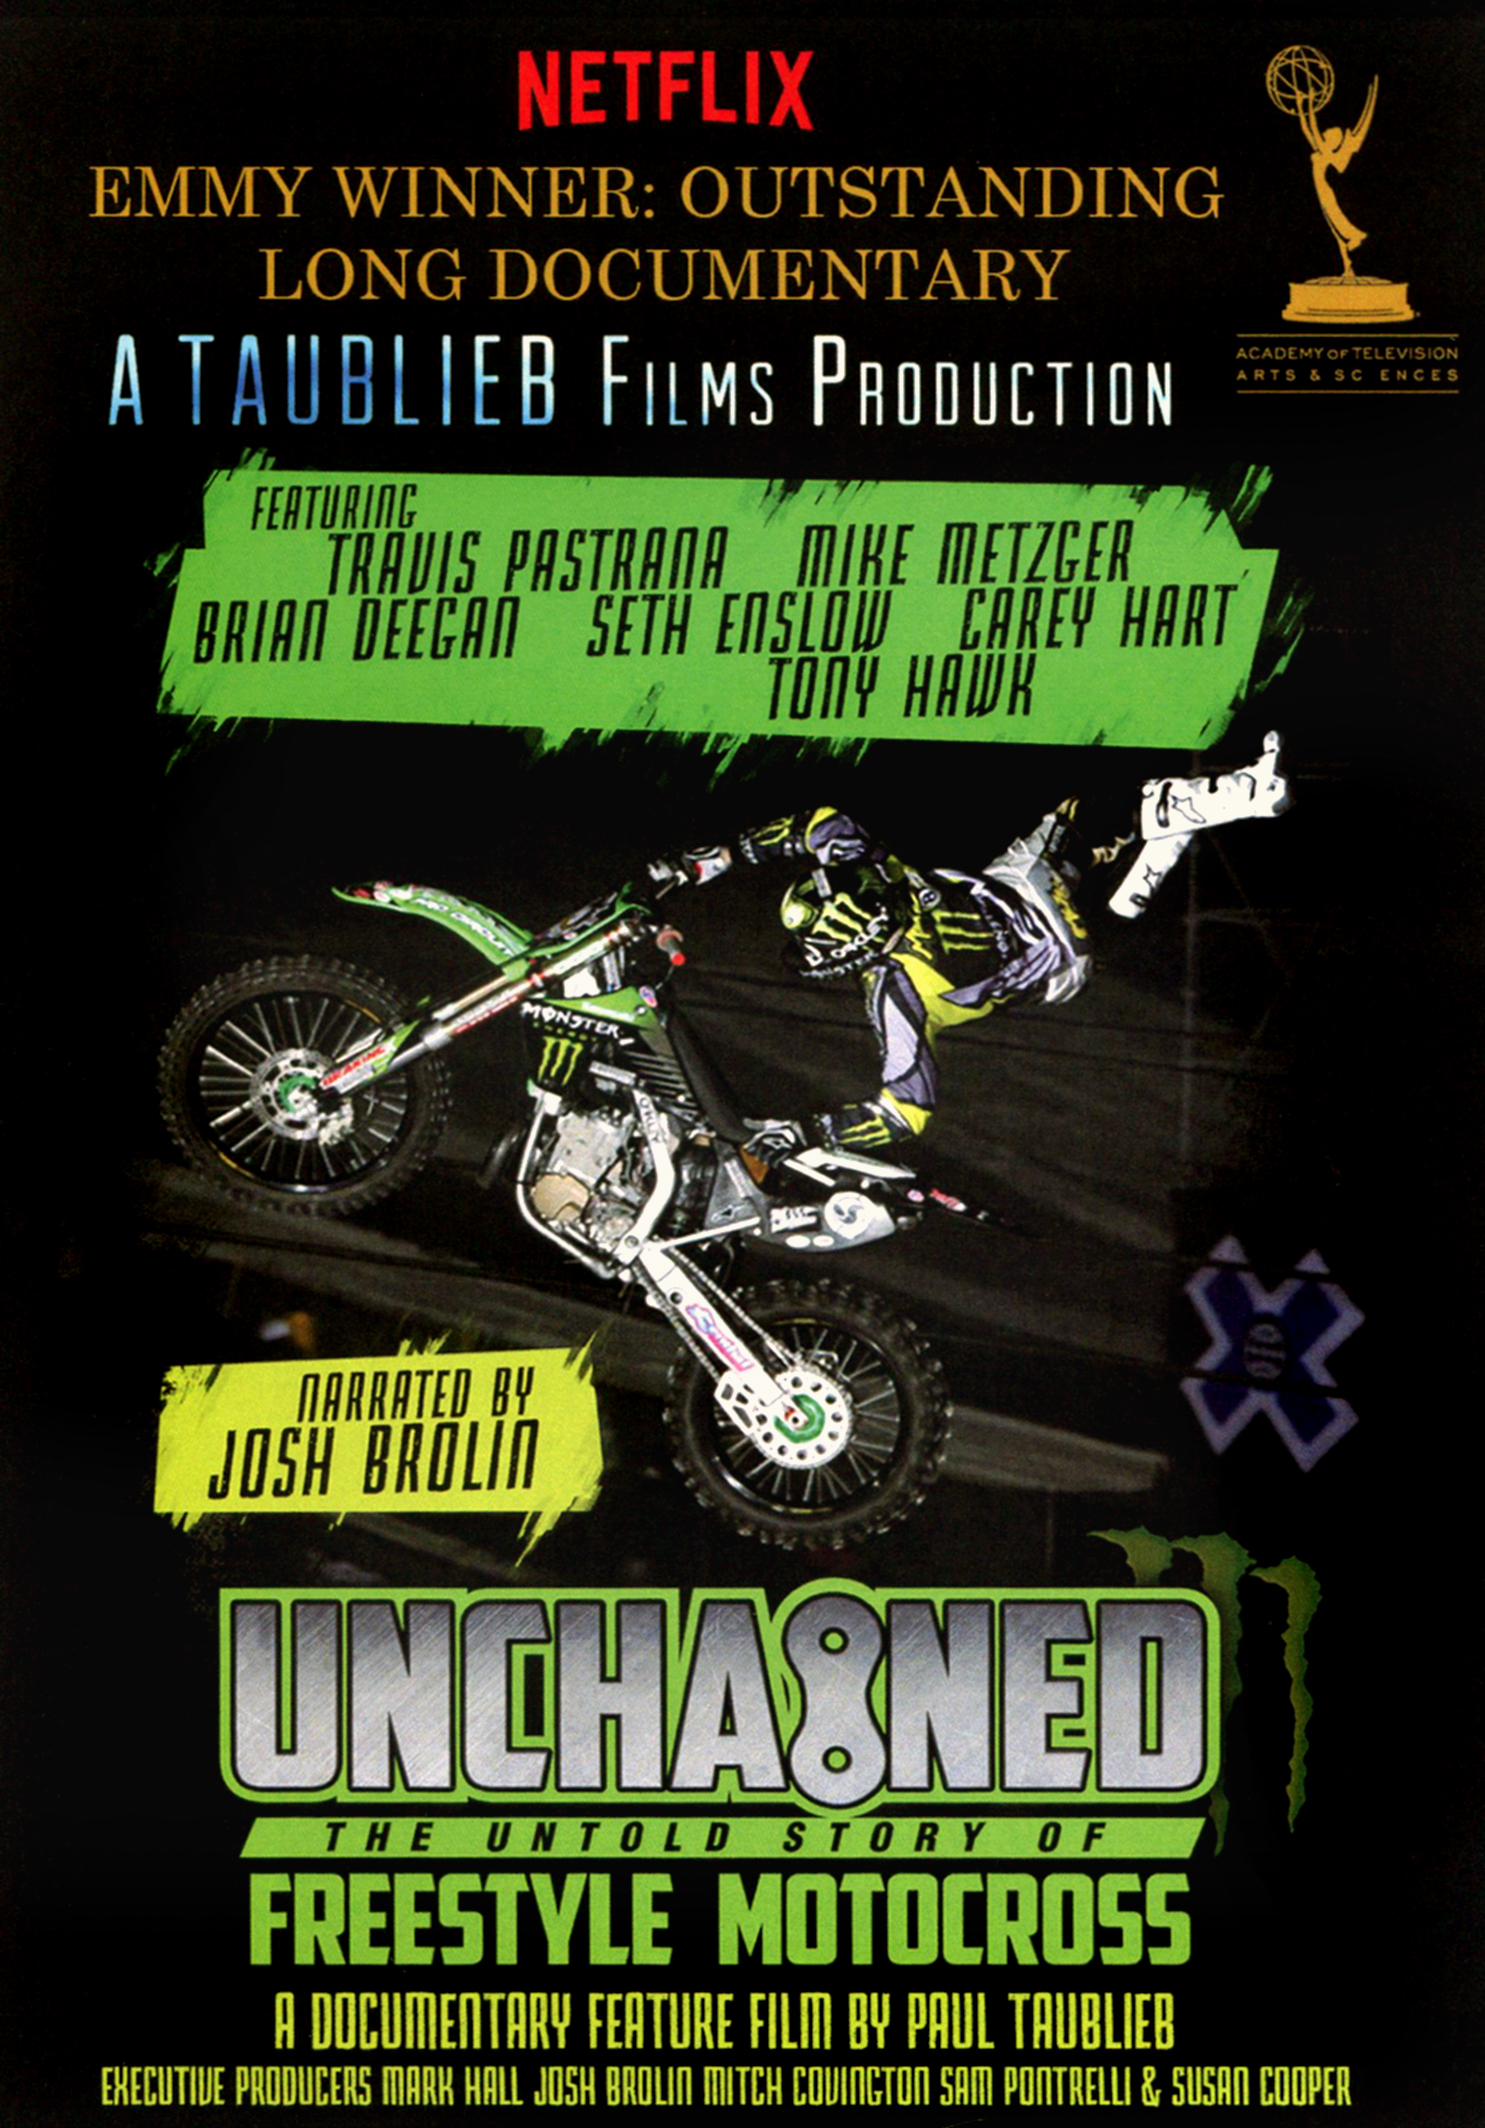 Unchained The Untold Story of Freestyle Motocross